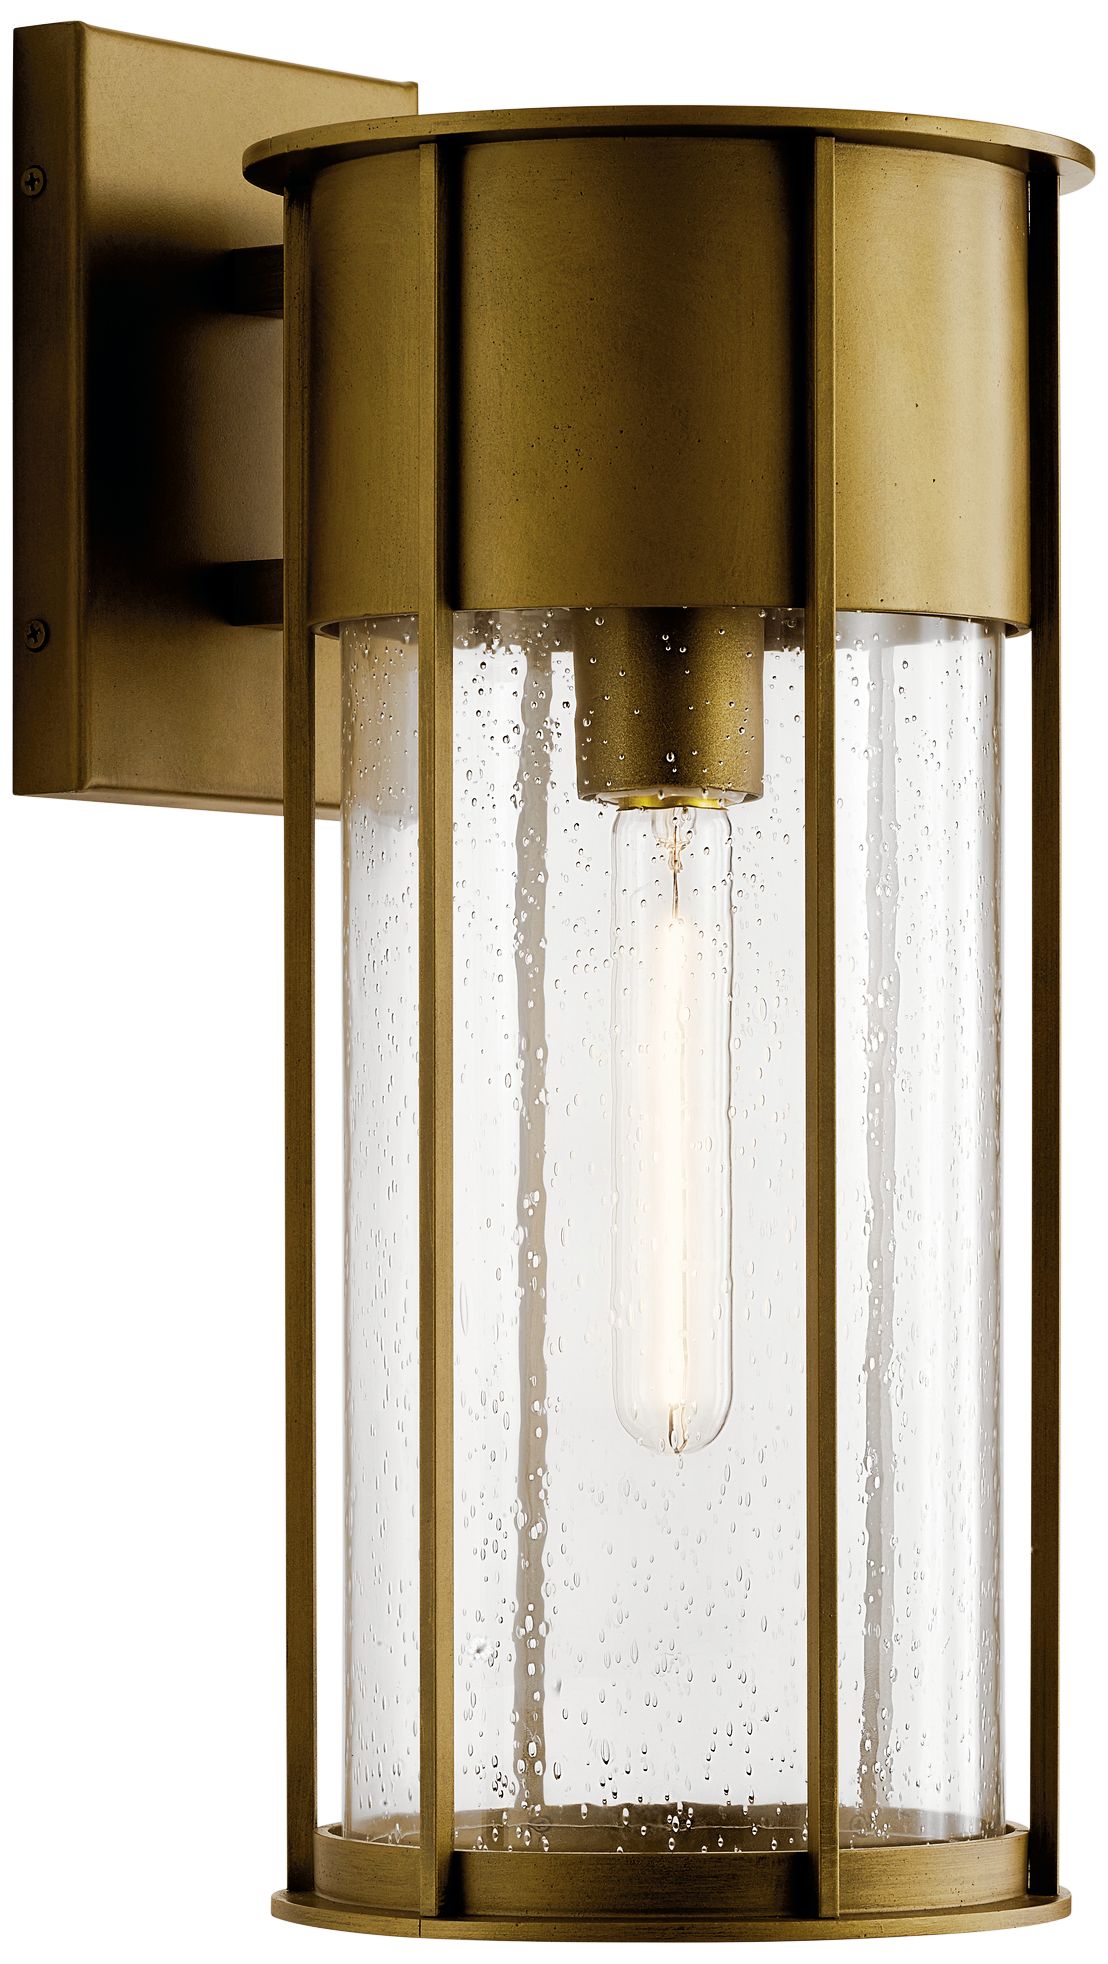 Kichler Camillo 18" High Natural Brass Outdoor Wall Light - image 1 of 7